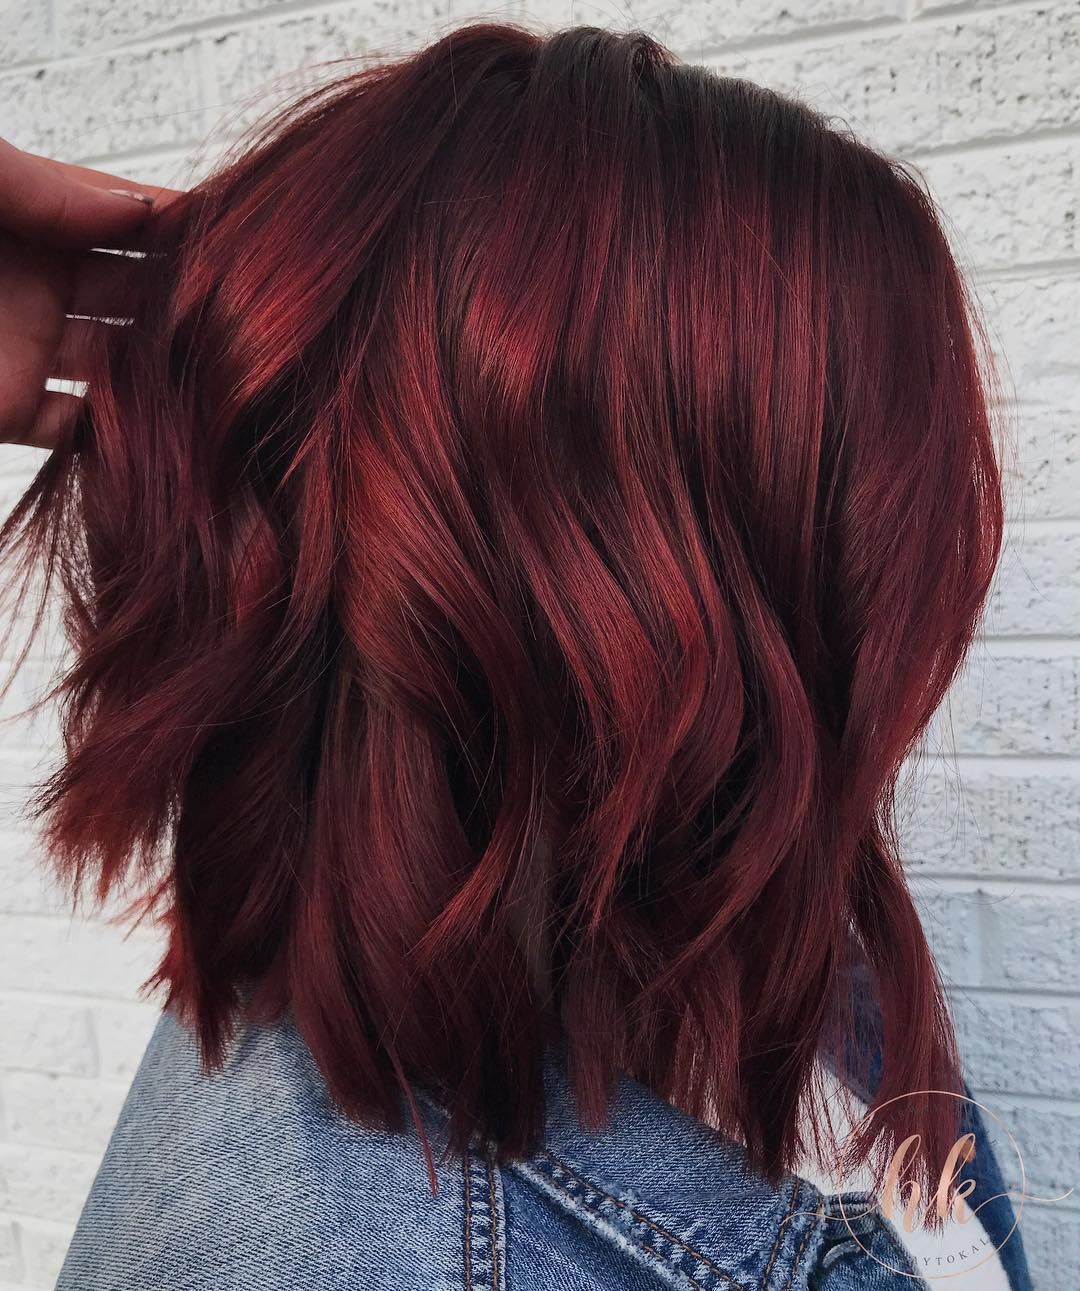 Hair coloring in red tones photo 14